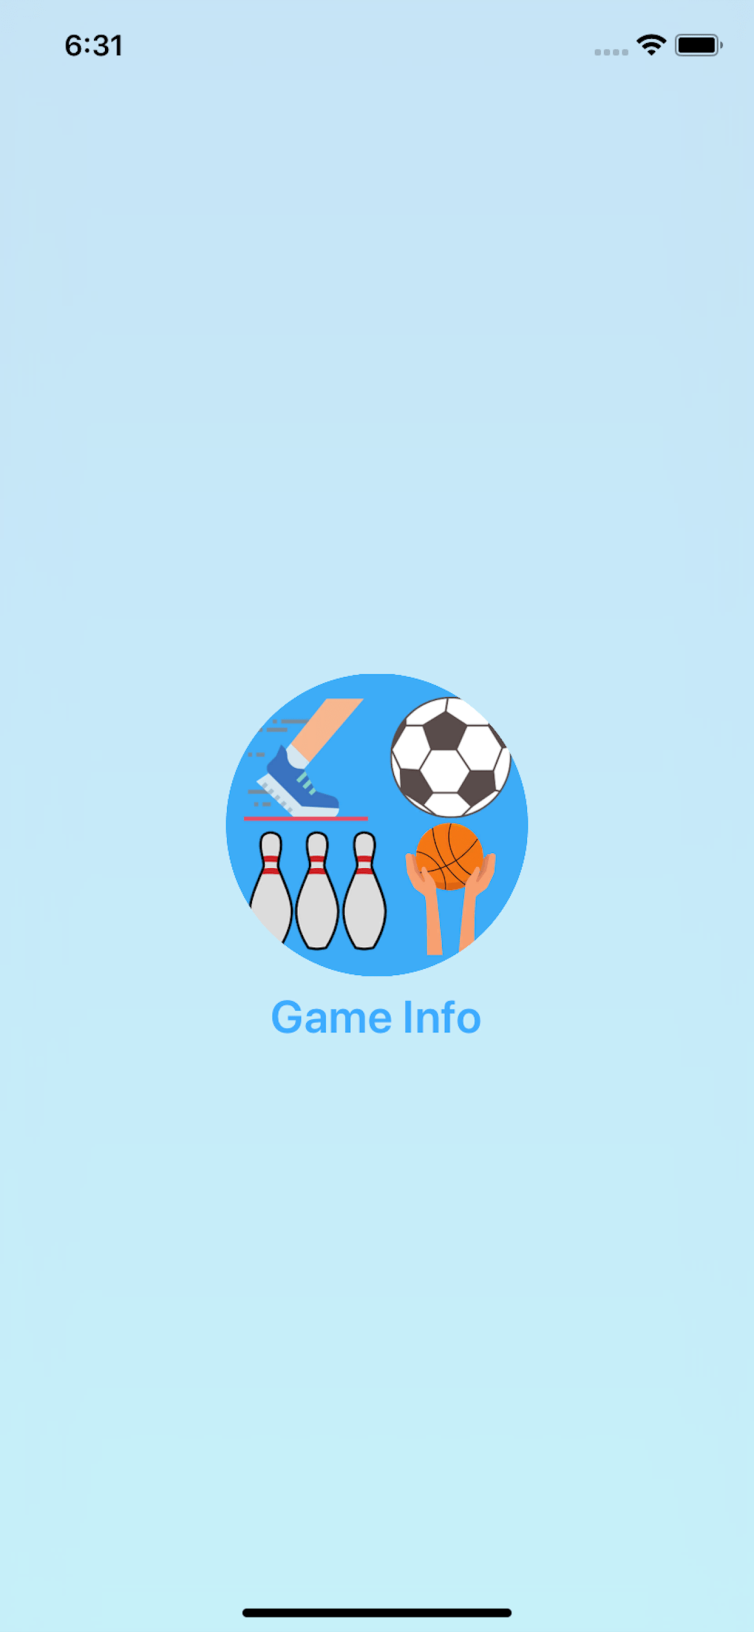 Game Information Application